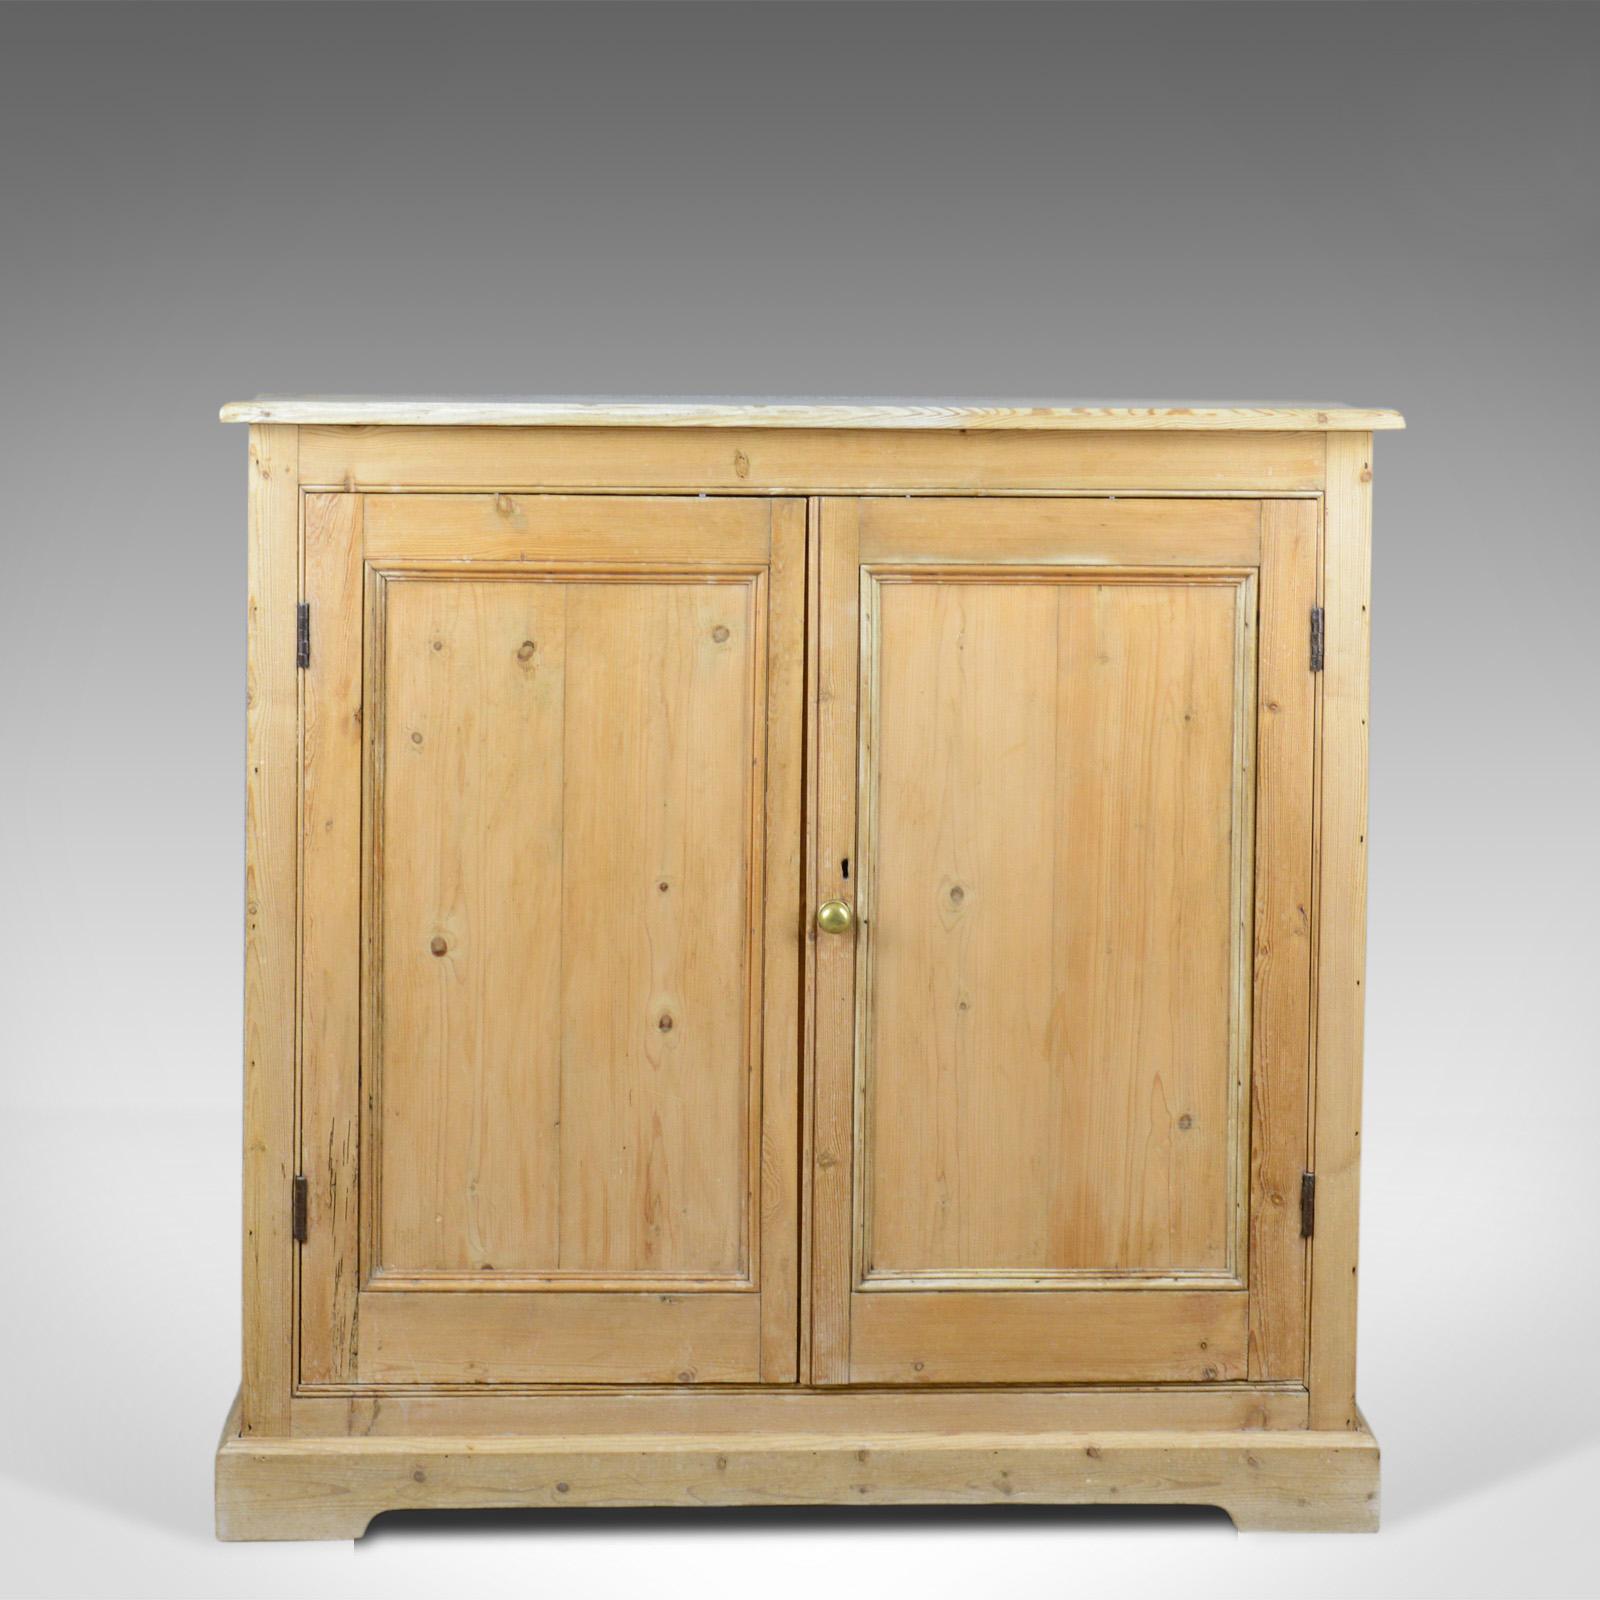 This is a narrow antique pine cupboard, an English, Victorian kitchen cabinet dating to circa 1850.

Chamfered edged top over pine cupboard
Grain interest with a desirable aged patina
Standing upon a continuous, shaped plinth base

A pair of